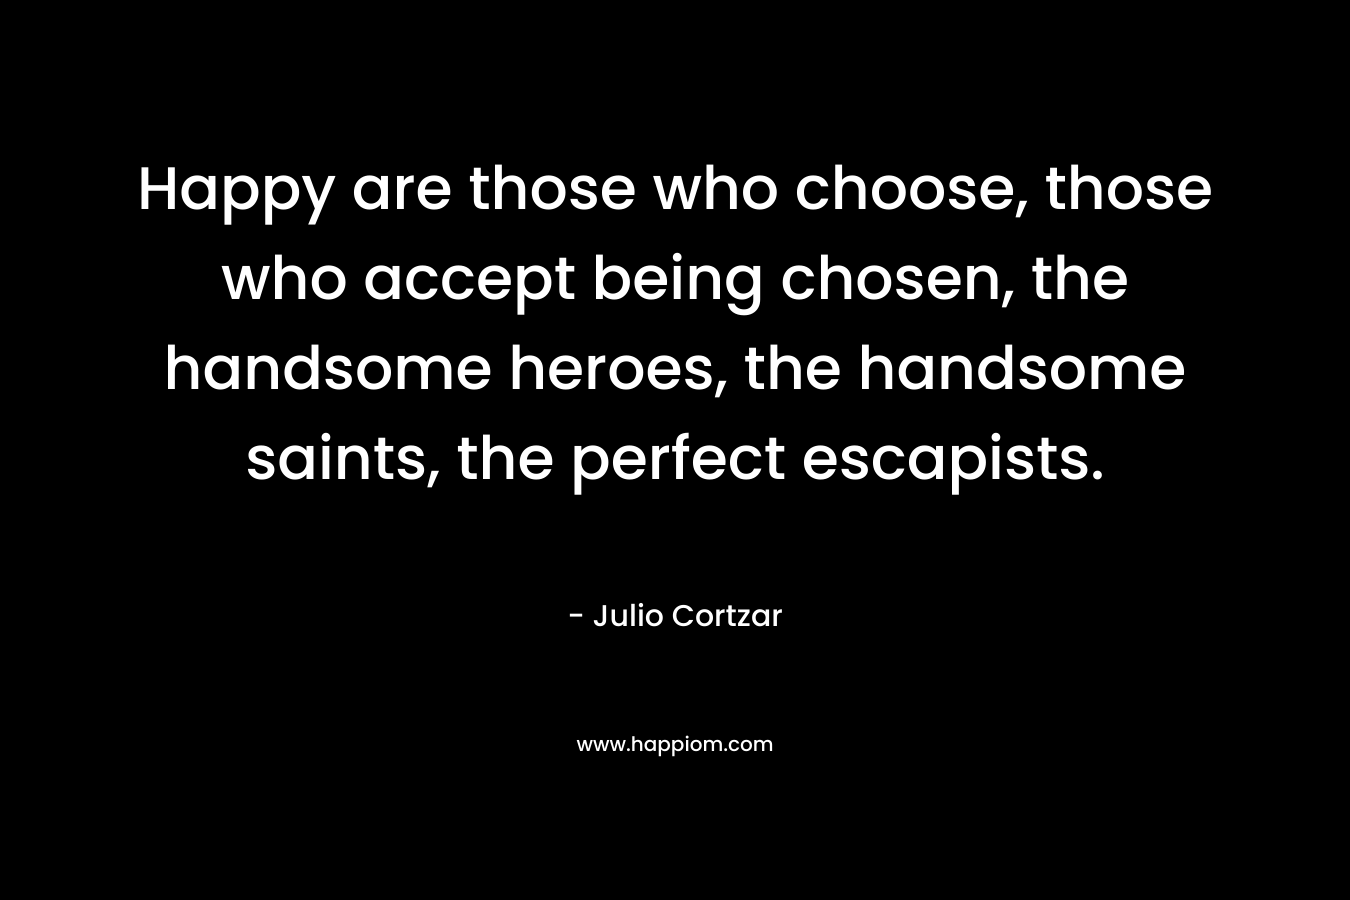 Happy are those who choose, those who accept being chosen, the handsome heroes, the handsome saints, the perfect escapists.